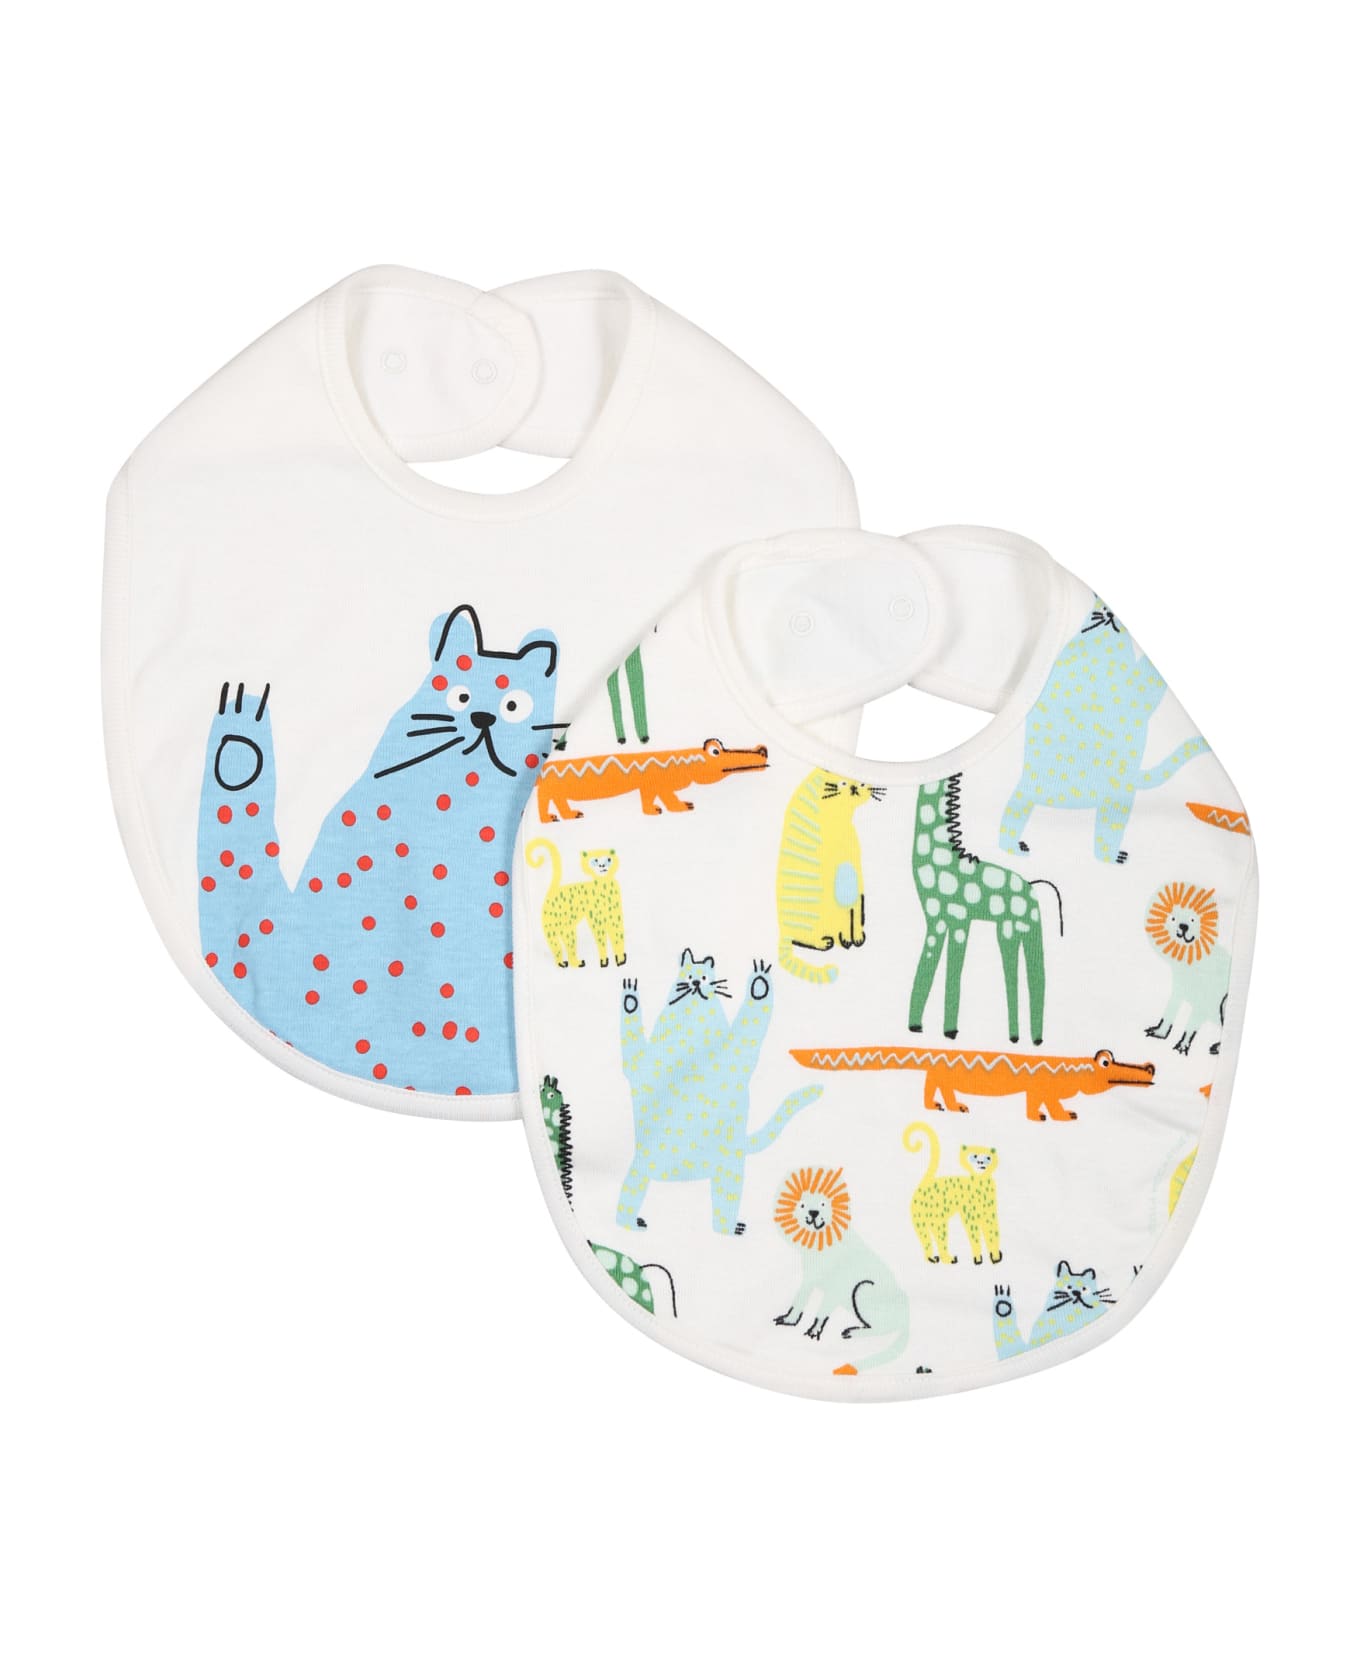 Stella McCartney Kids White Set For Baby Boy With Animals Print - Multicolor